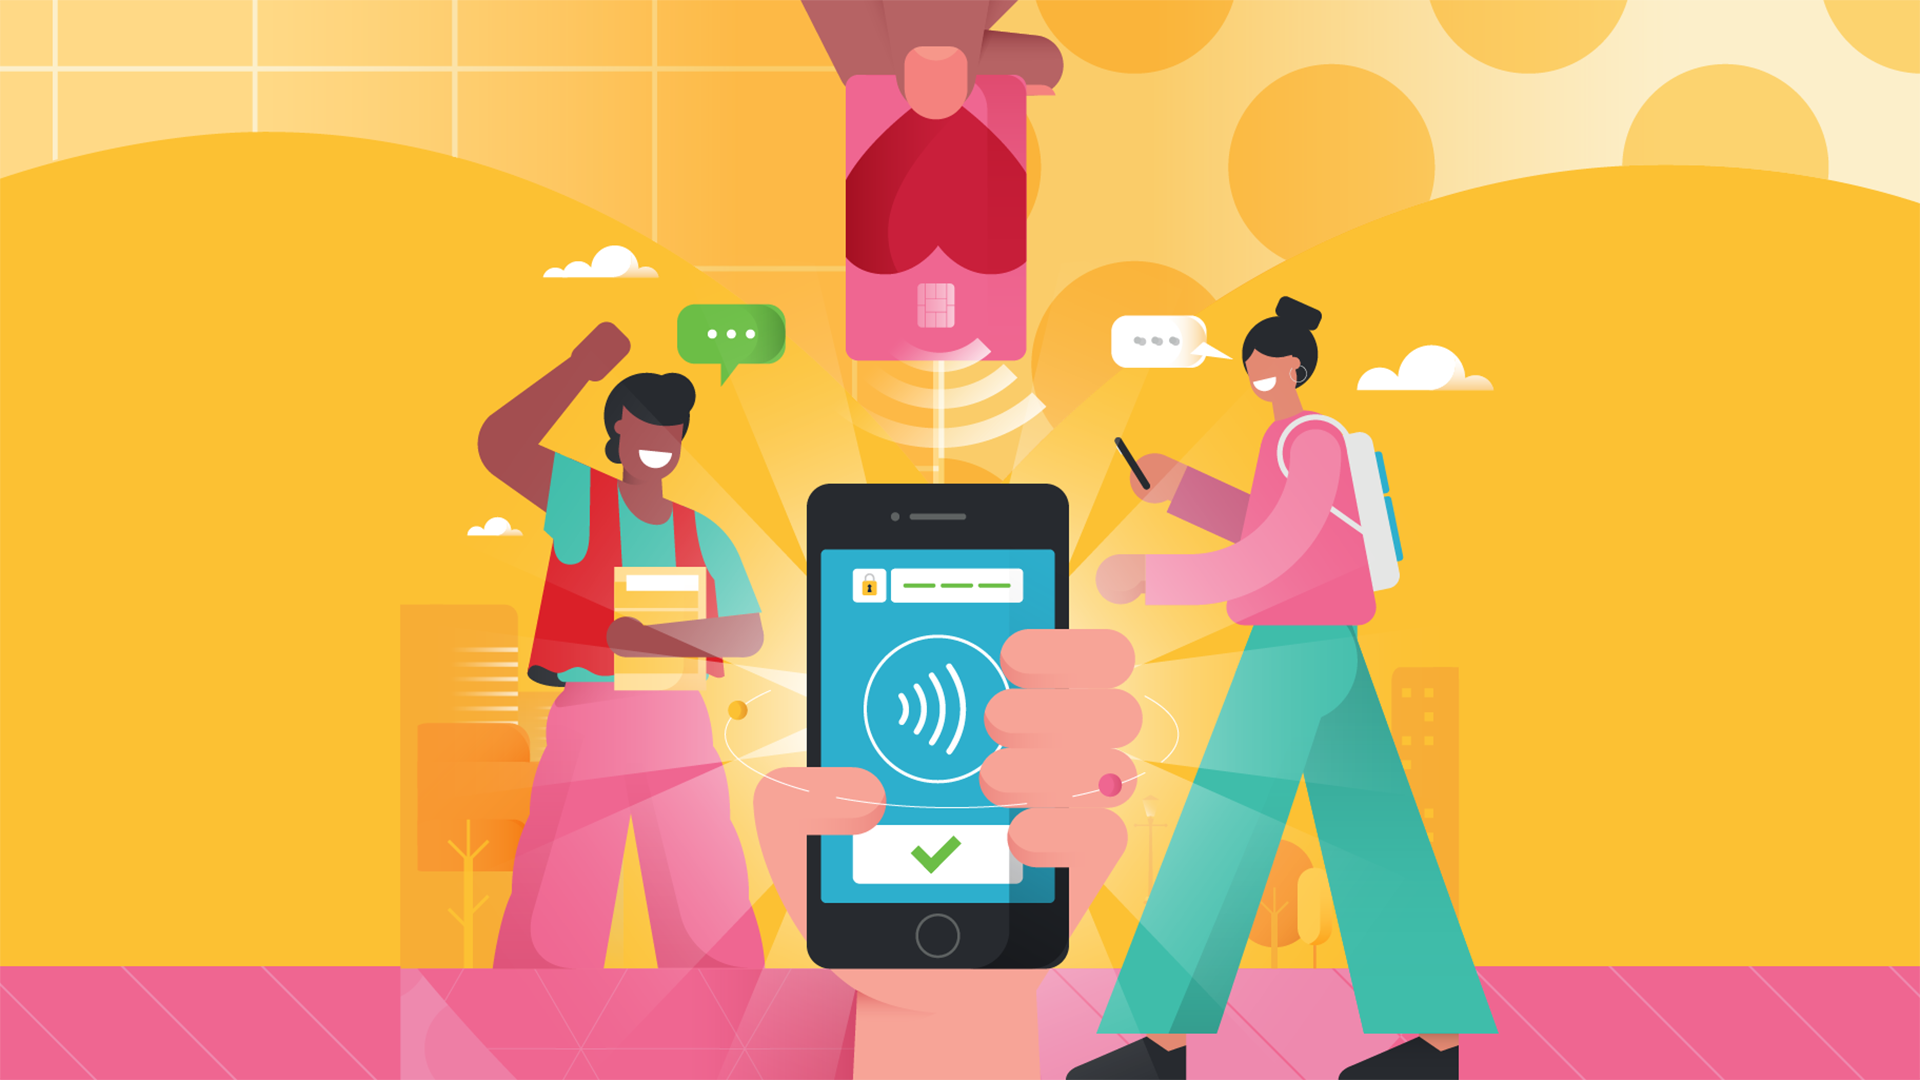 Illustration of two people engaging in a digital transaction. The foreground shows an enlarged smartphone displaying a successful contactless payment notification. In the background, one person wearing a Big Issue vendor's tabard holds magazines, gesturing in victory, while the other, carrying a backpack, uses their own phone, symbolizing connectivity and mobile commerce.